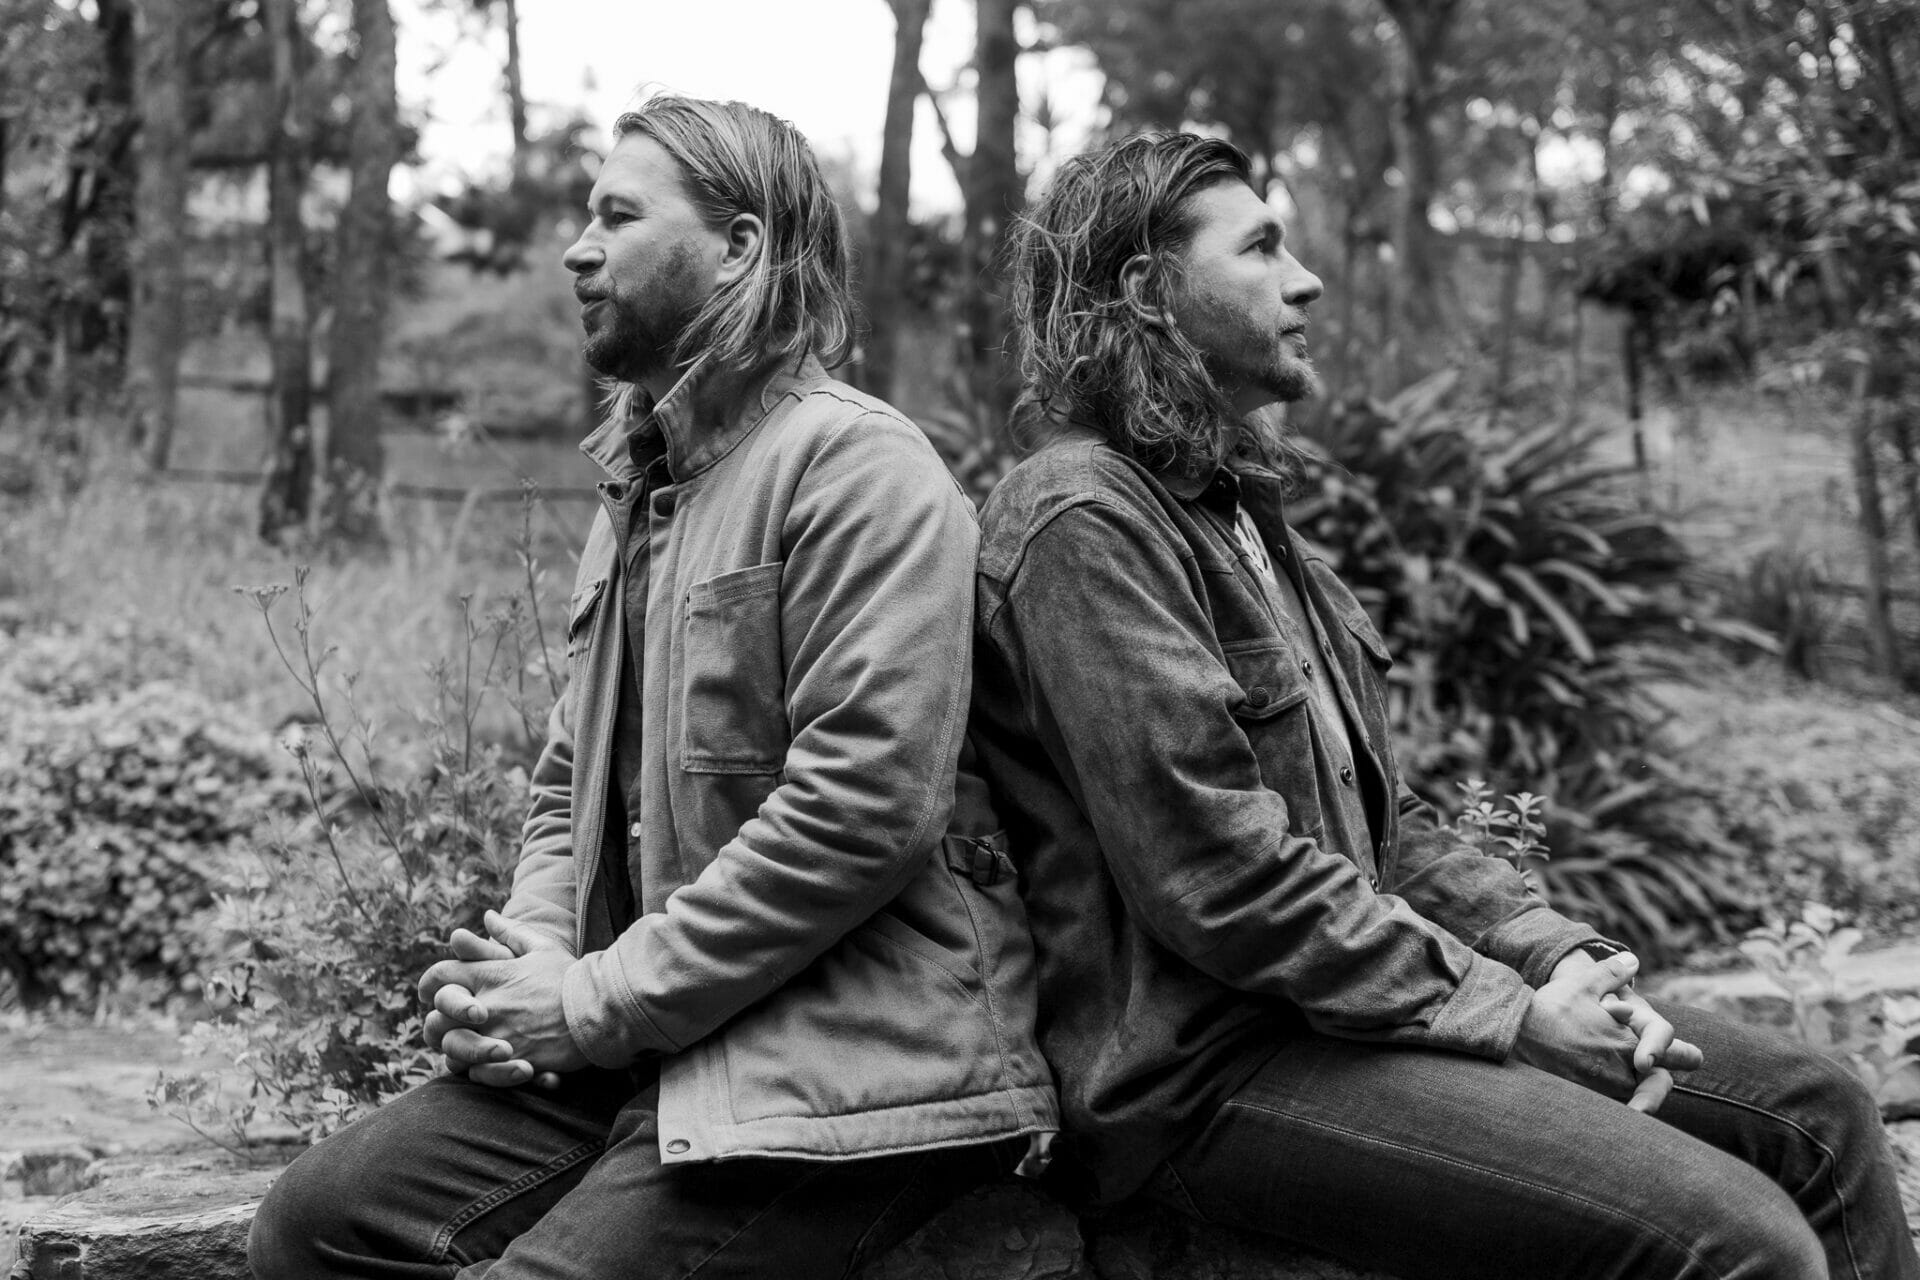 Track By Track: The Teskey Brothers Explore 'The Winding Way'